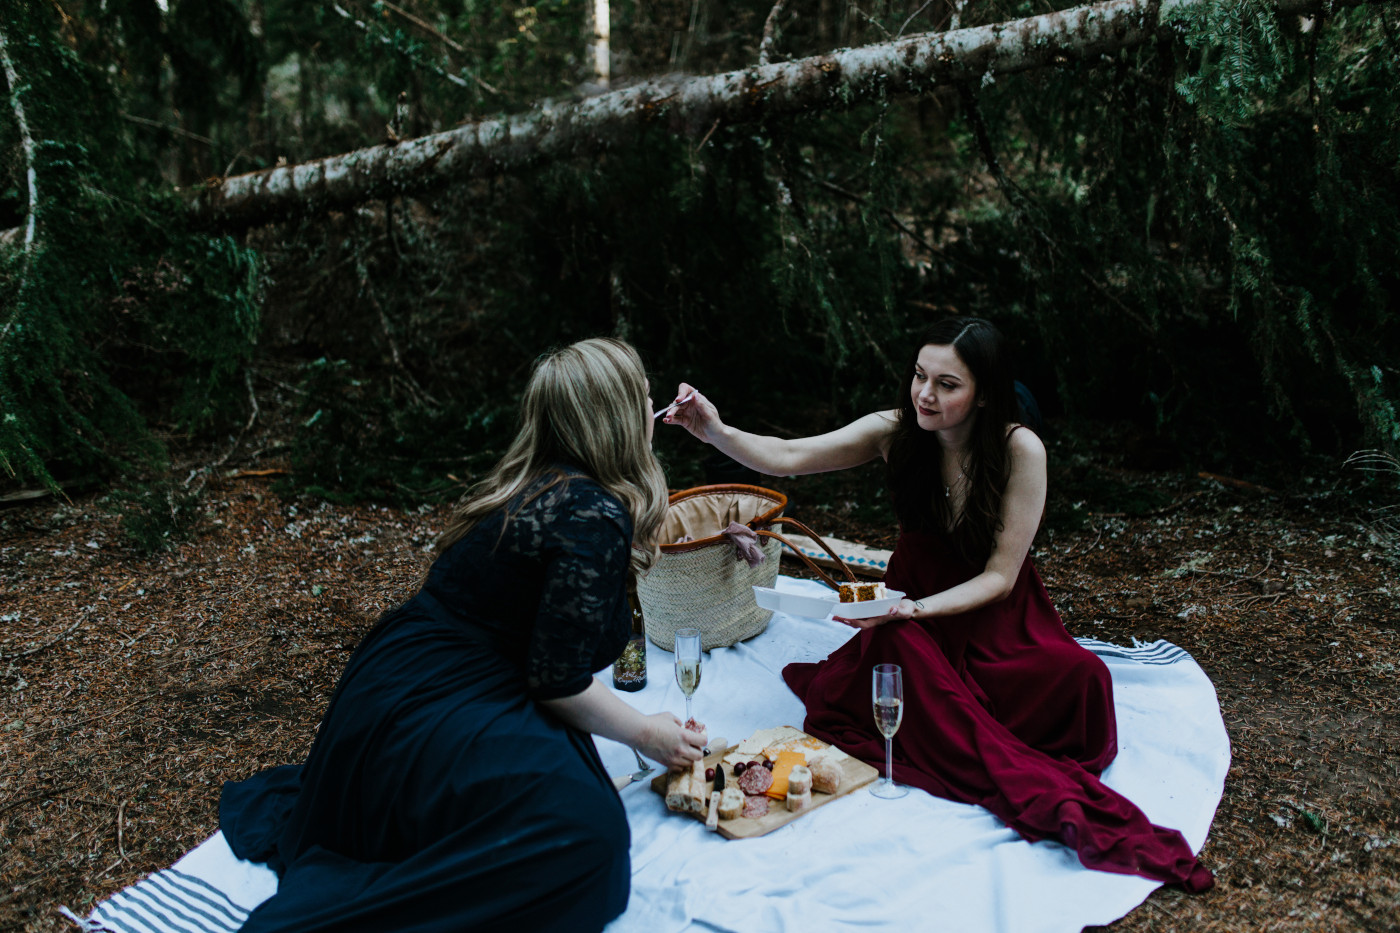 Tiffany feeds Hayley food from the picnic. Elopement photography at the Columbia River Gorge by Sienna Plus Josh.